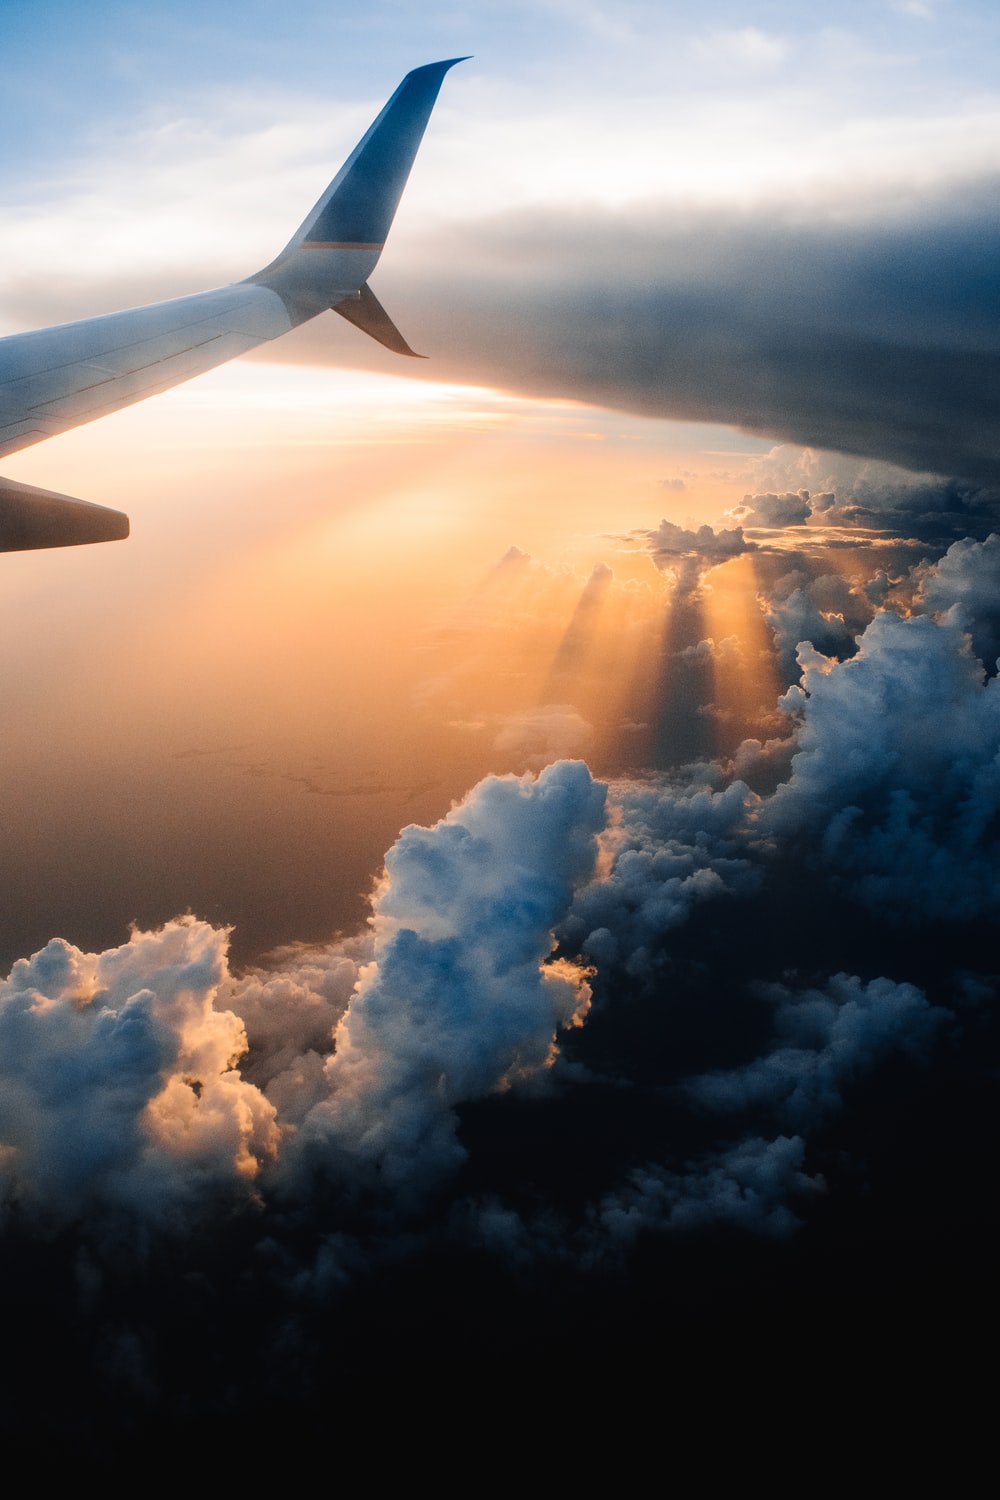 Airplane Sunset Picture. Download Free Image